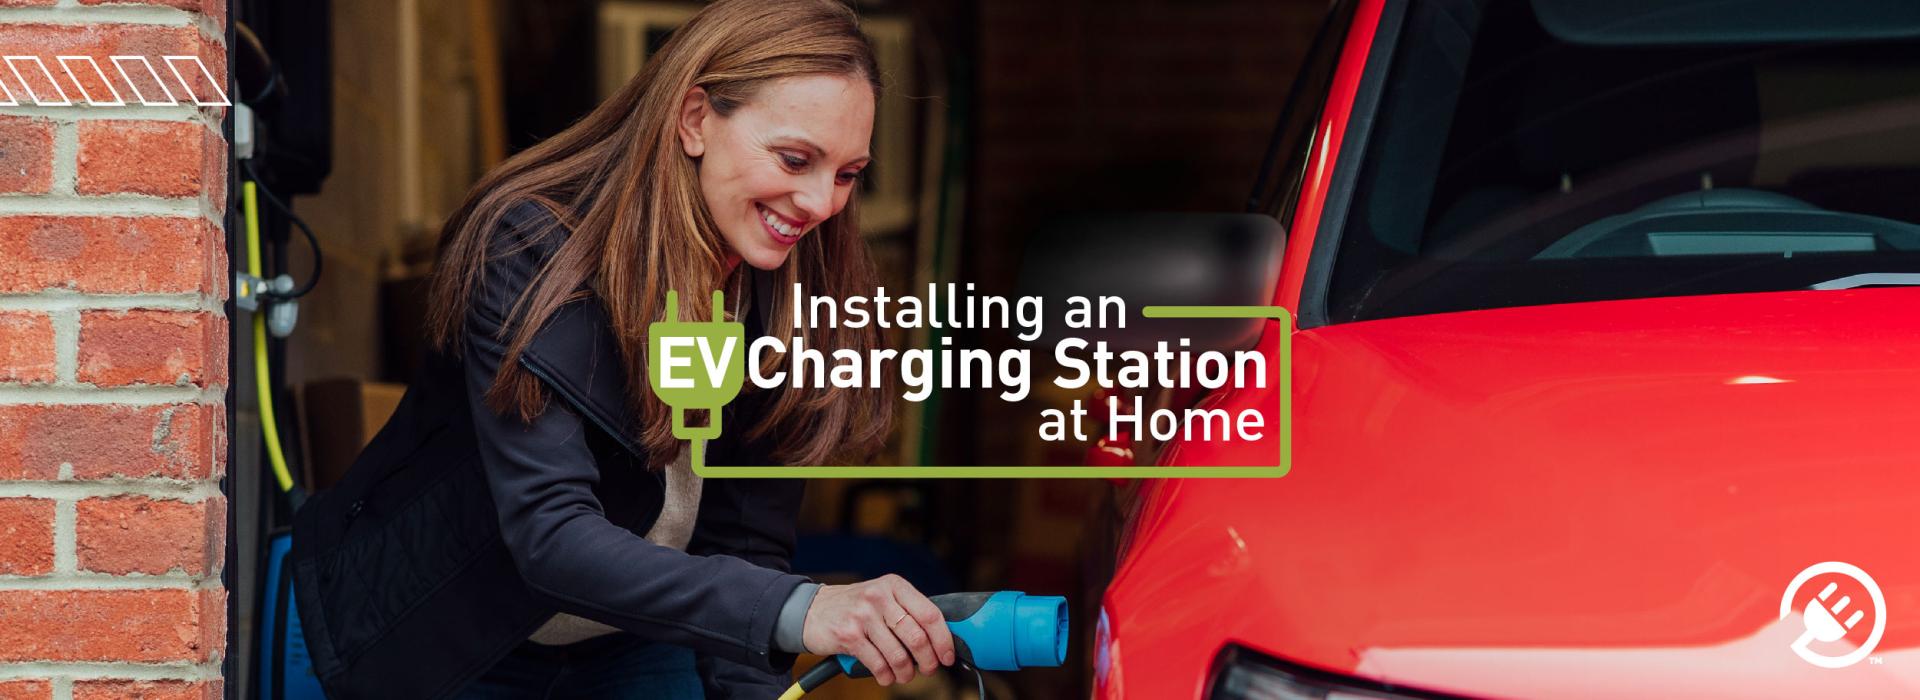 Tips for Installing an EV Charging Station at Home